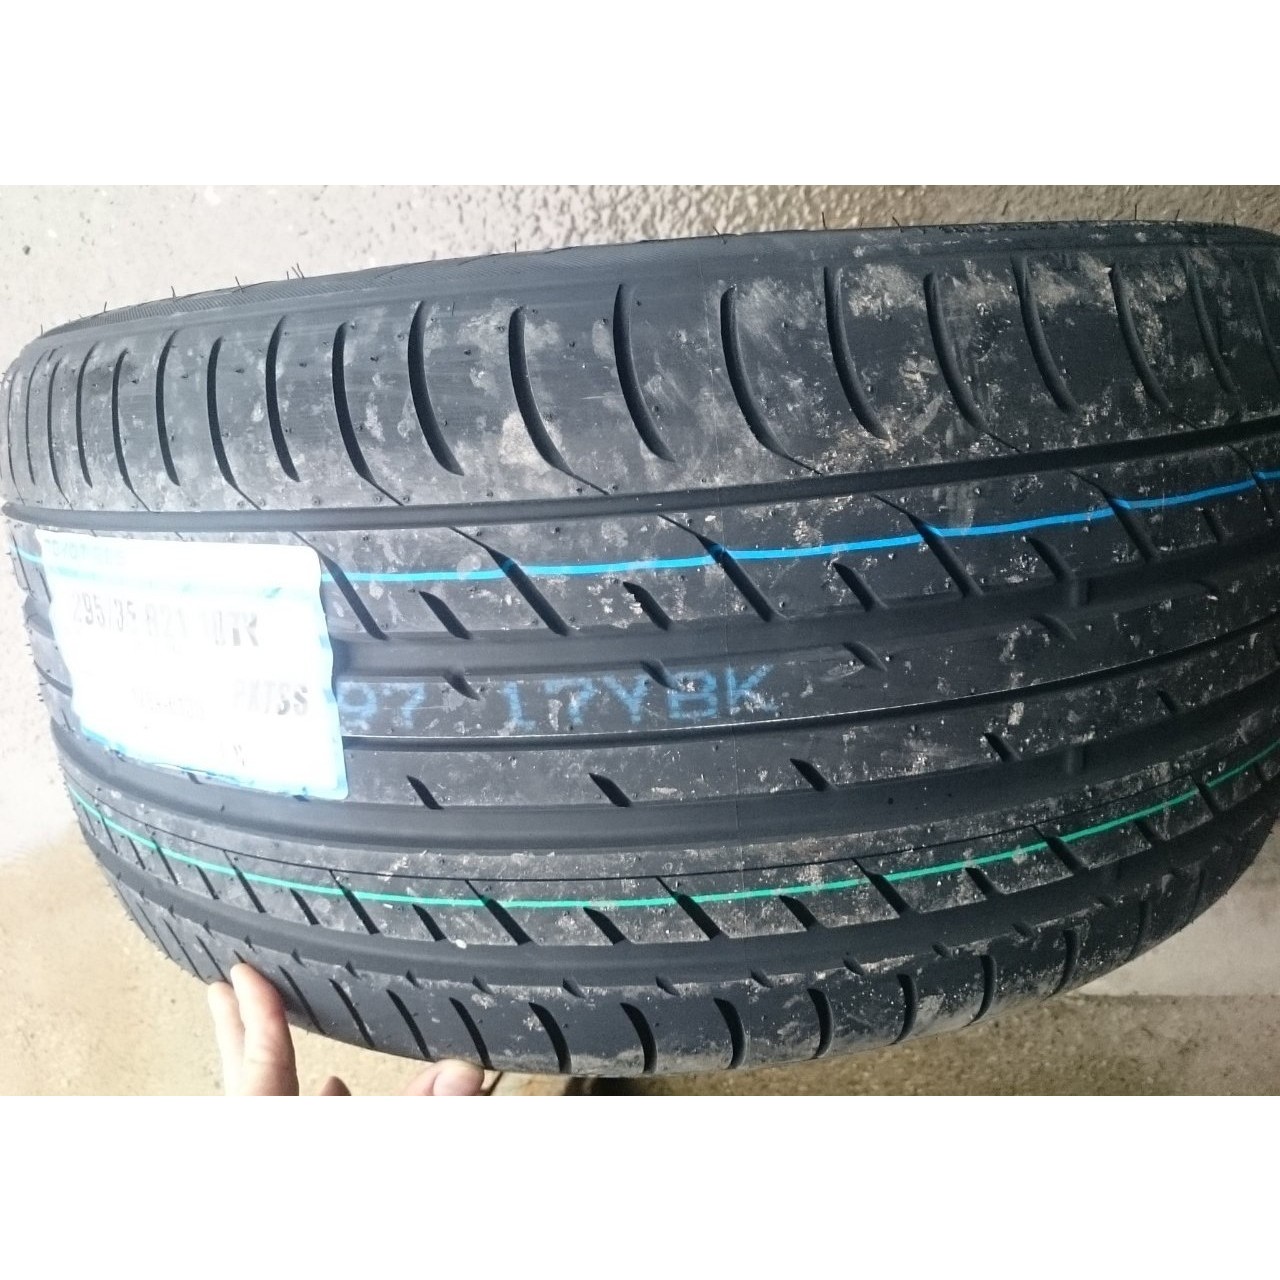 Proxes sport отзывы. Toyo PROXES t1 Sport. Toyo PROXES Sport 255. Toyo PROXES t1 Sport SUV 265/50 r20. Toyo PROXES Sport 275/40 r20.